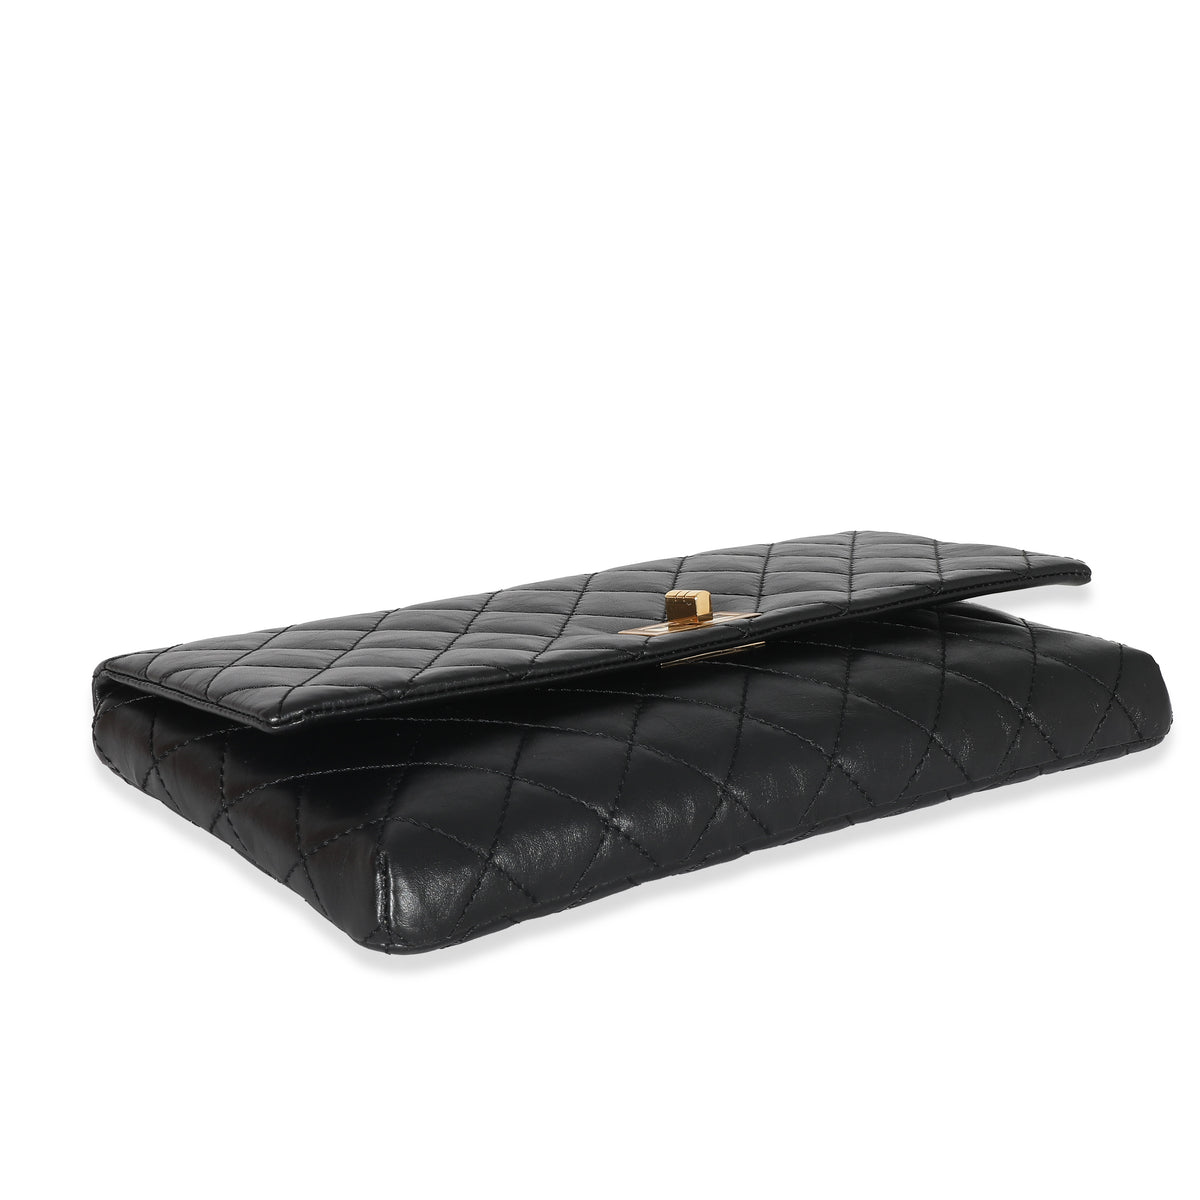 Chanel Black Leather Reissue Fold Over Clutch